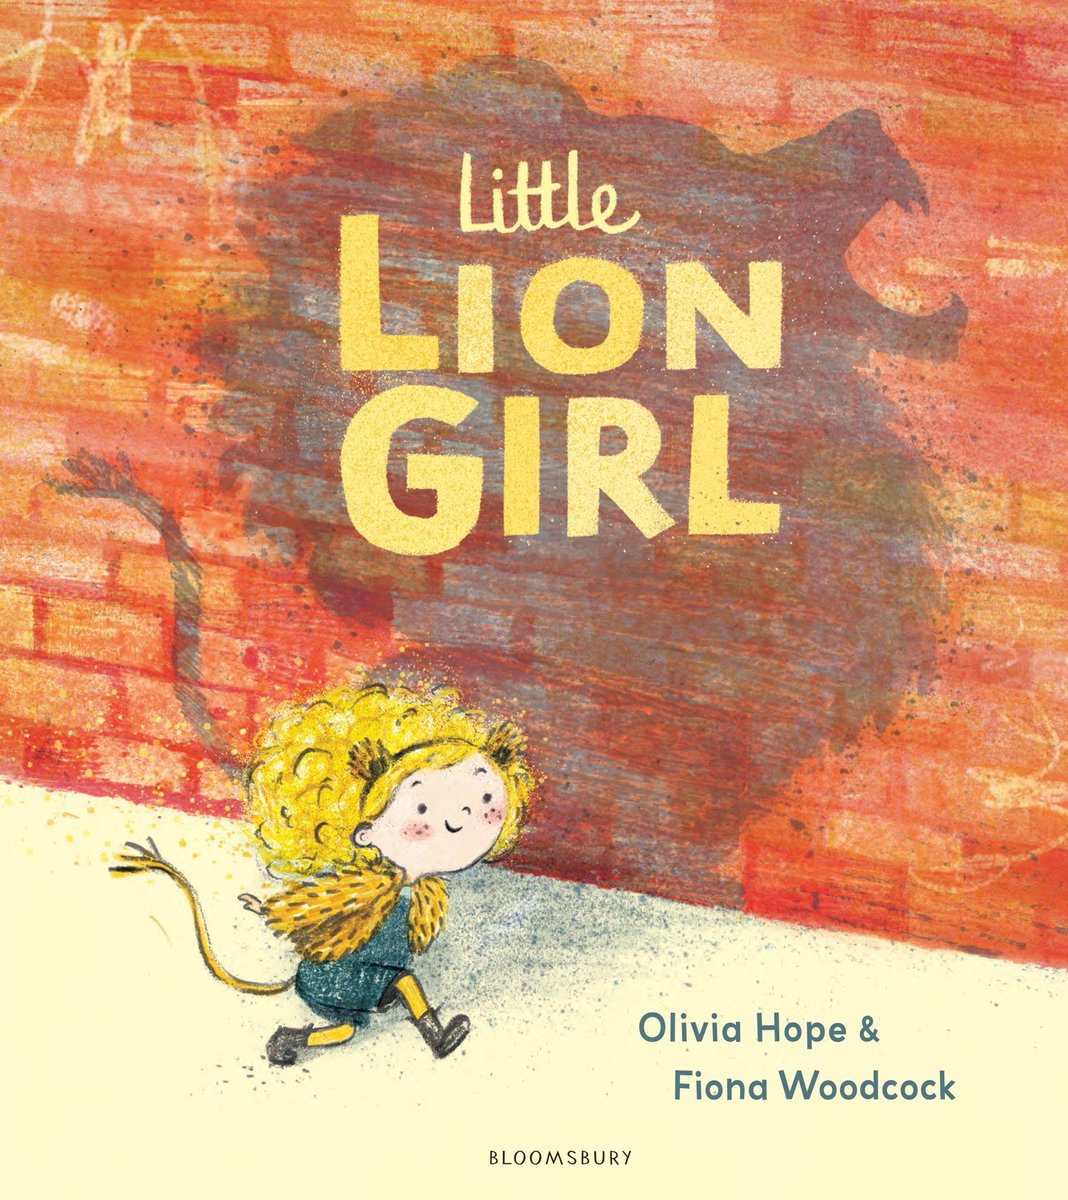 I spy Little Lion Girl by Olivia Hope and me in this very lovely summer selection by @SchoolReading : ) Out in June with @KidsBloomsbury 💛🦁